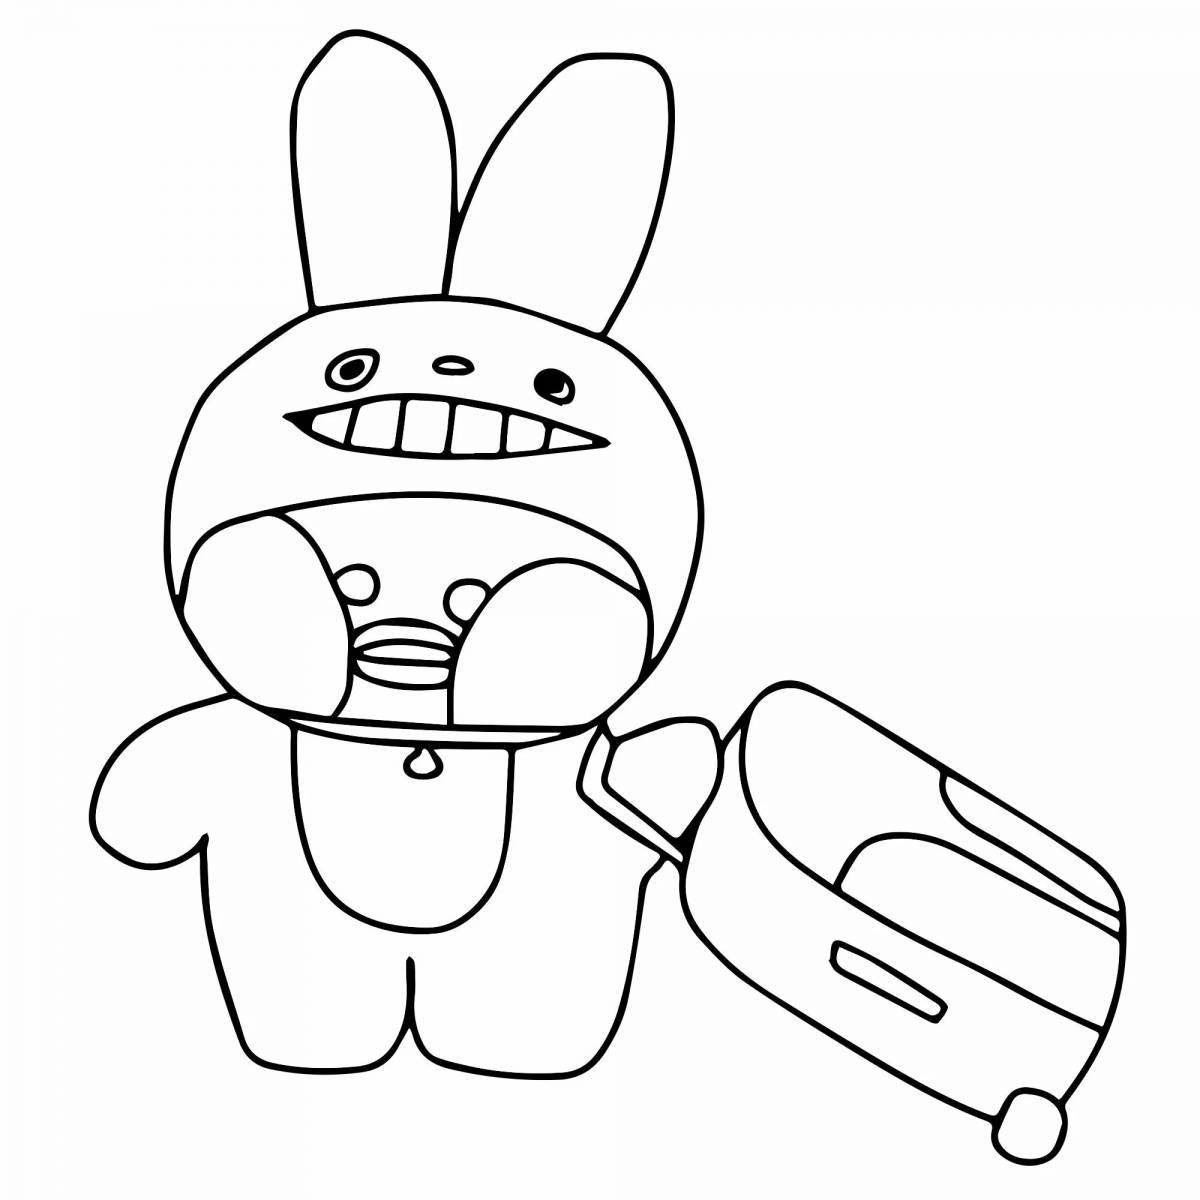 Playful squick coloring page